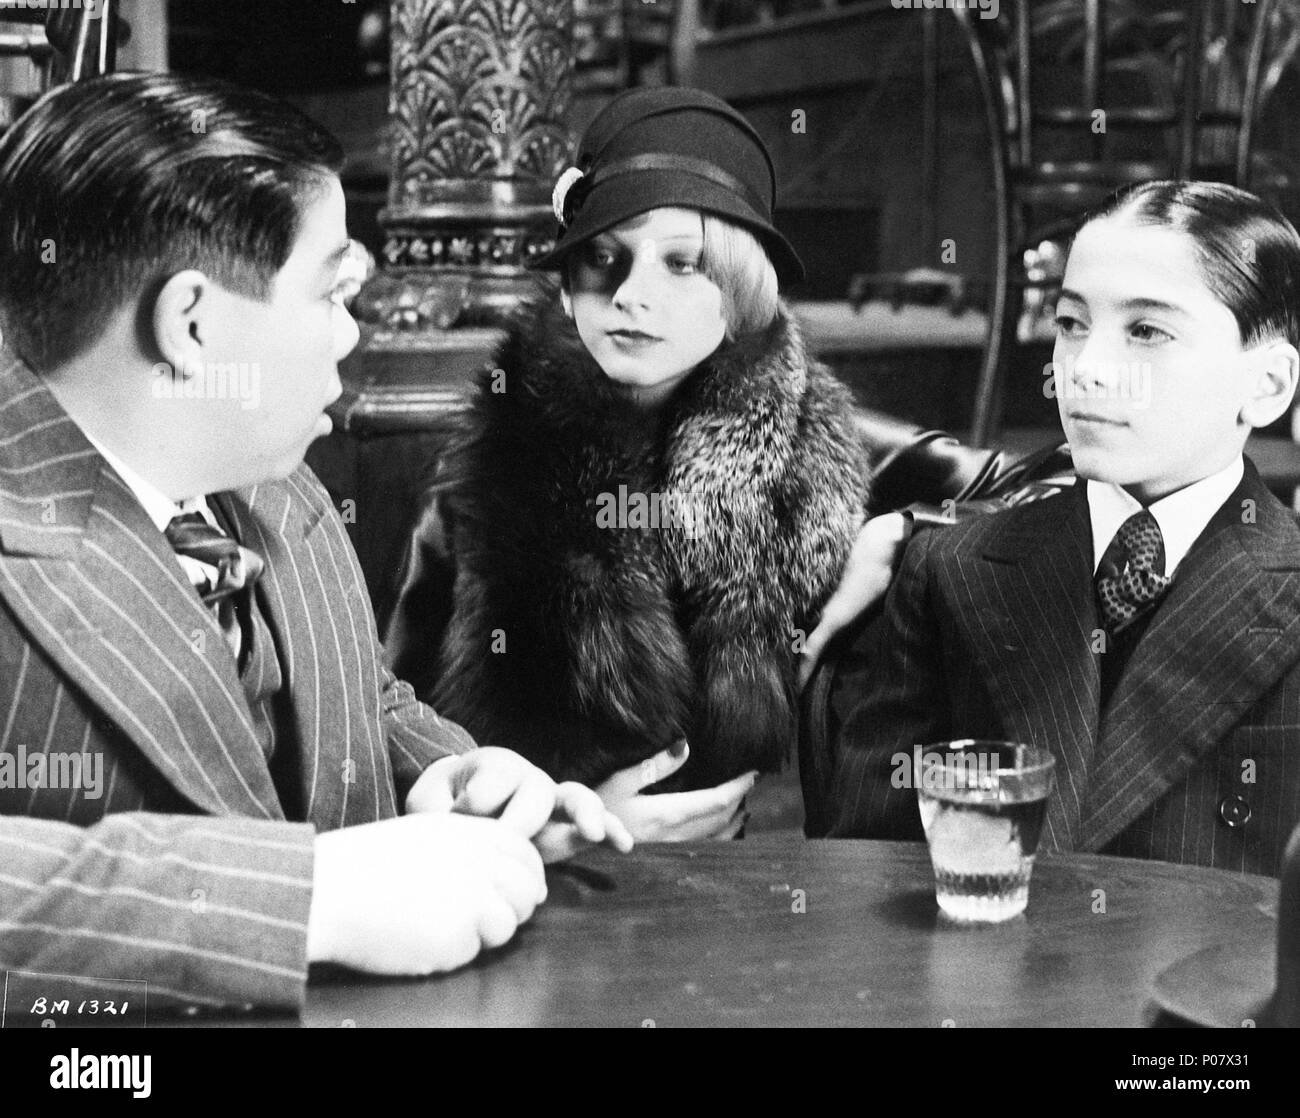 Bugsy malone still Black and White Stock Photos & Images - Alamy